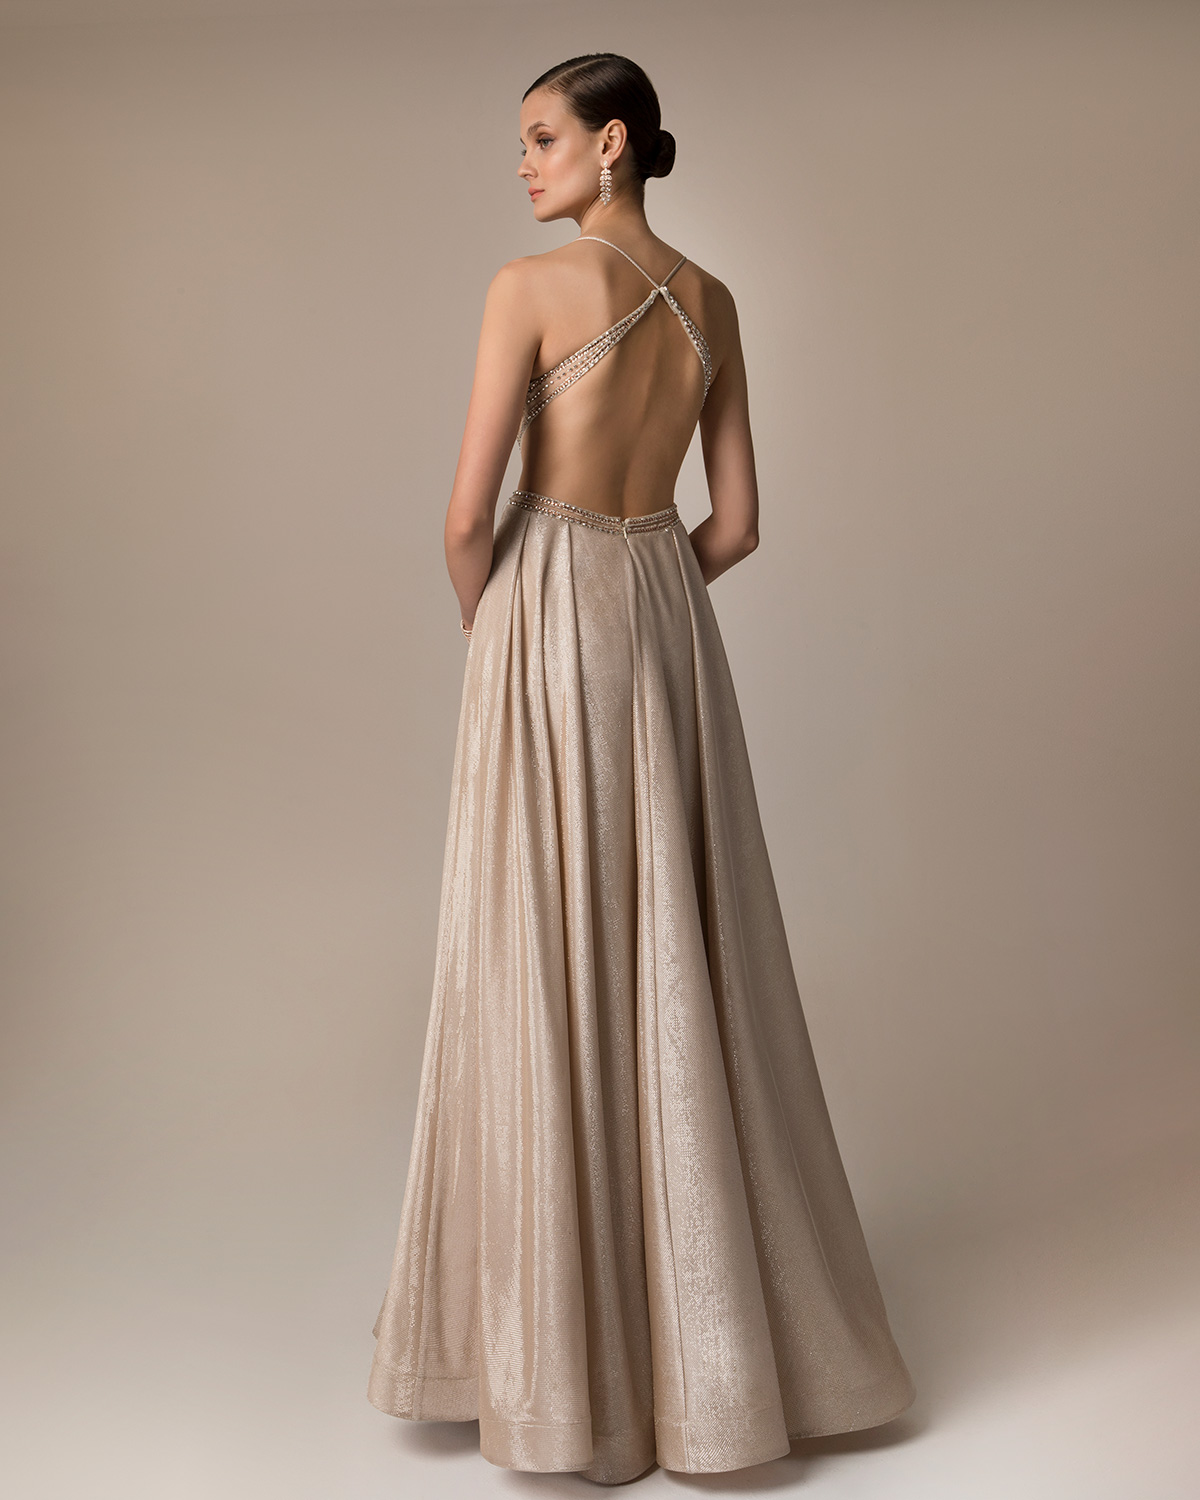 Evening Dresses / Long evening dress with shining fabric and beaded top and straps